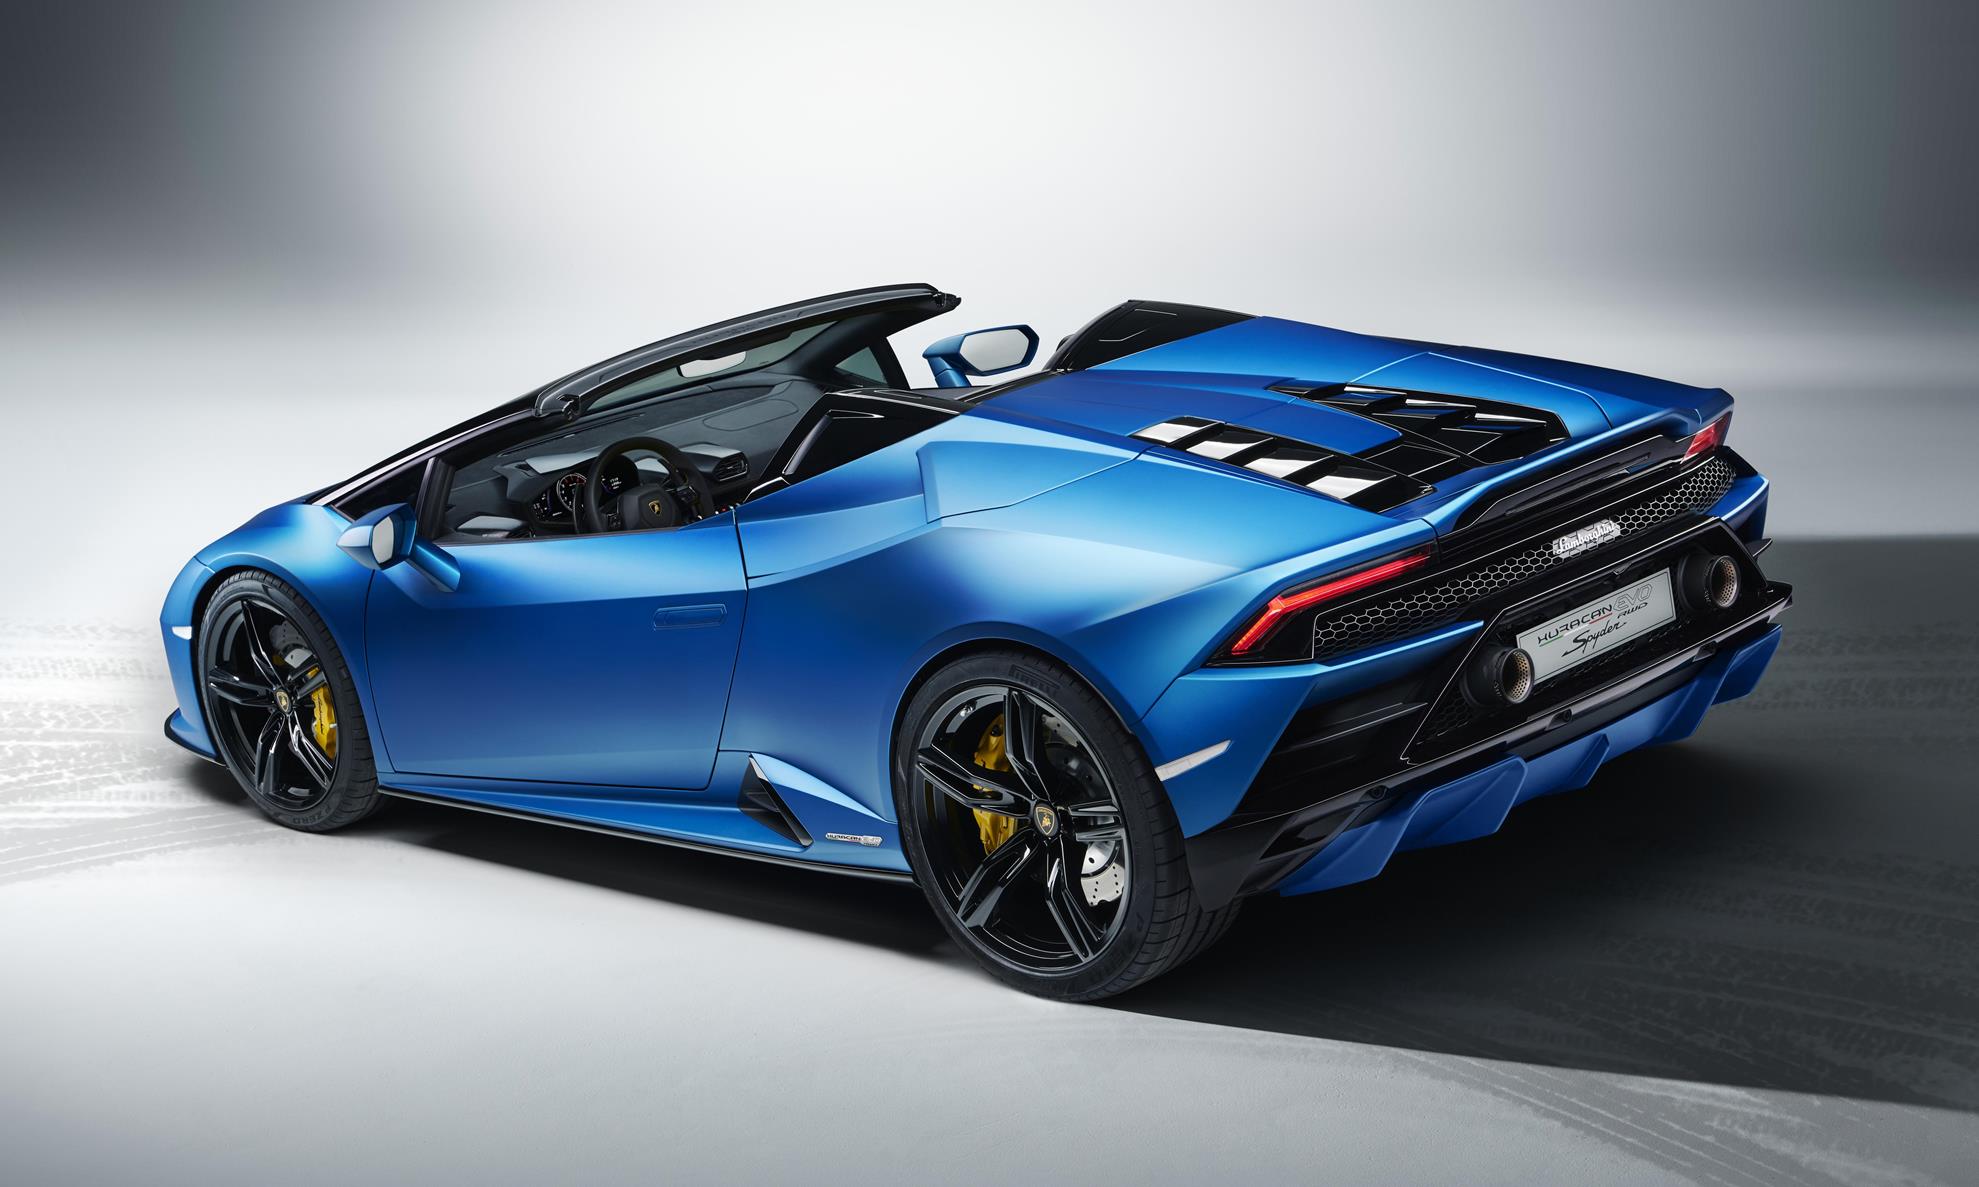 Huracan Evo RWD Spyder debuts today with 449 kW and 560 N.m